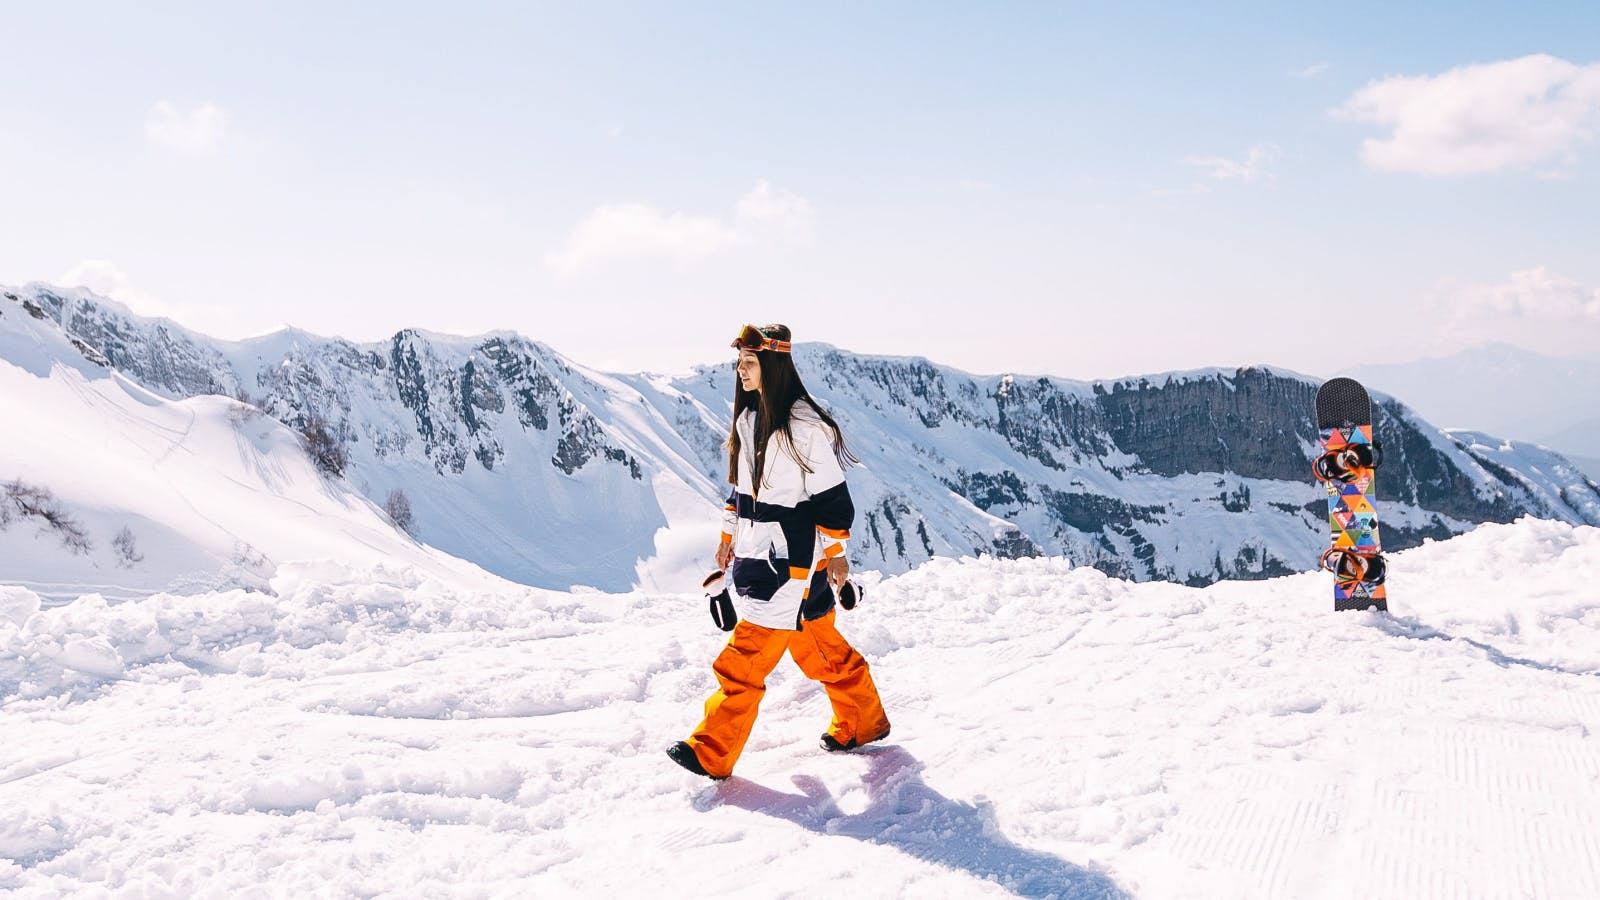 A woman walking away from her snowboard. She is wearing snowboard gear and at the top of a snowy mountain. 